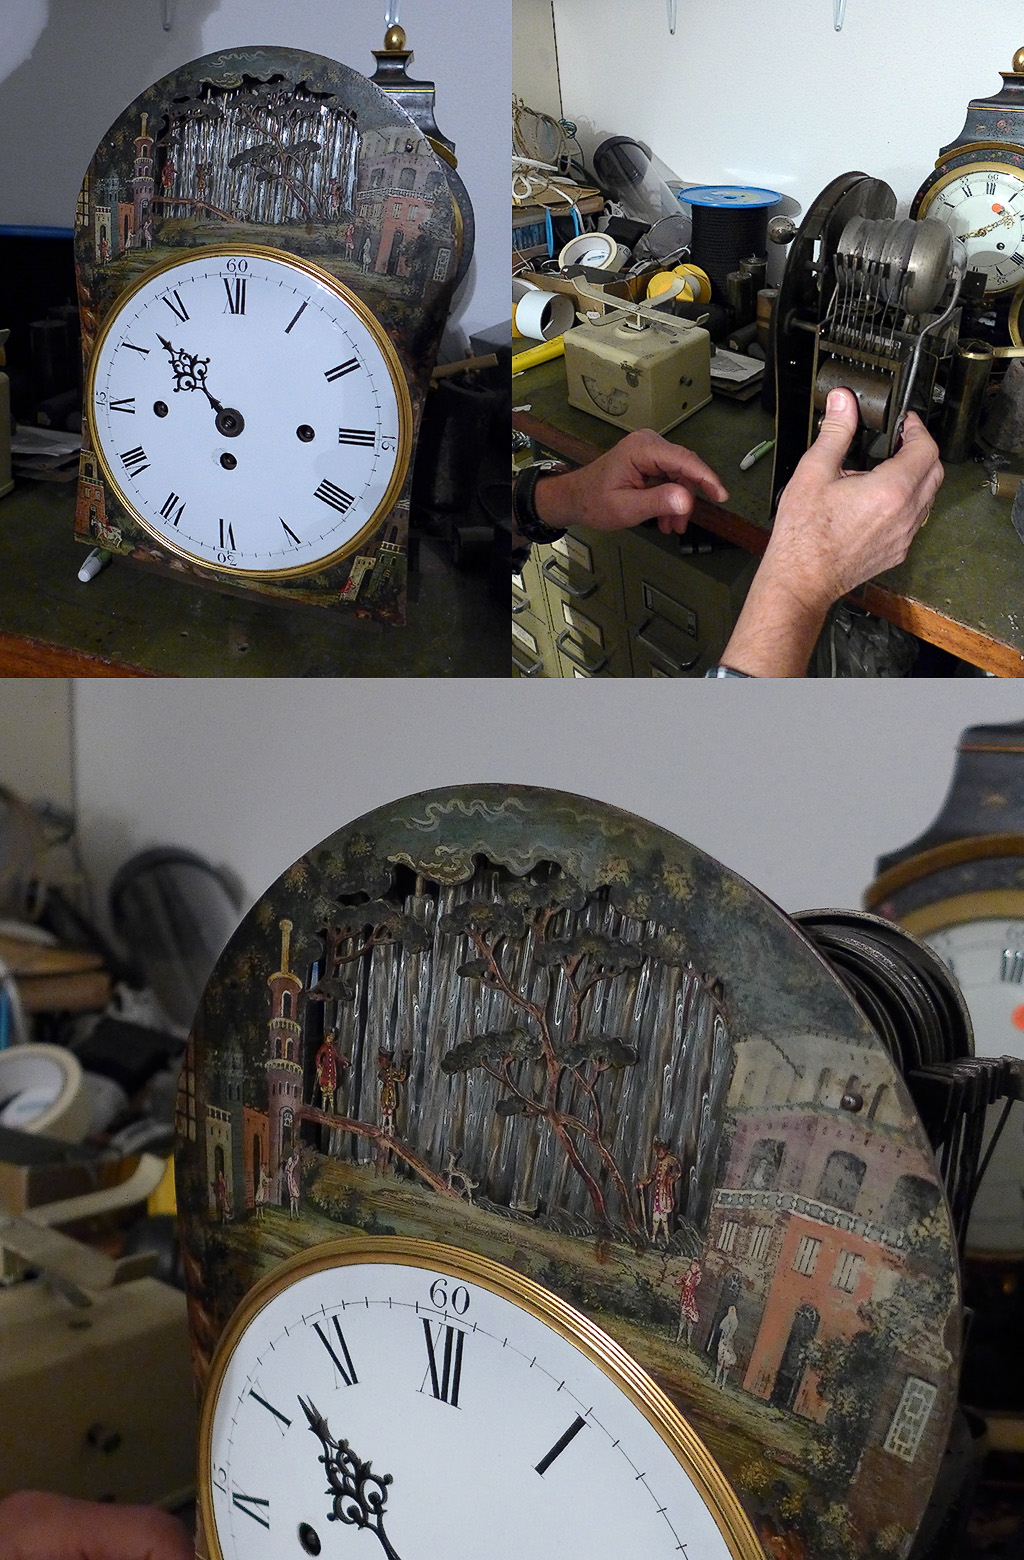 One of the more interesting clocks on restoration- there is a feature that depicts a waterfall when the sonnerie chimes.